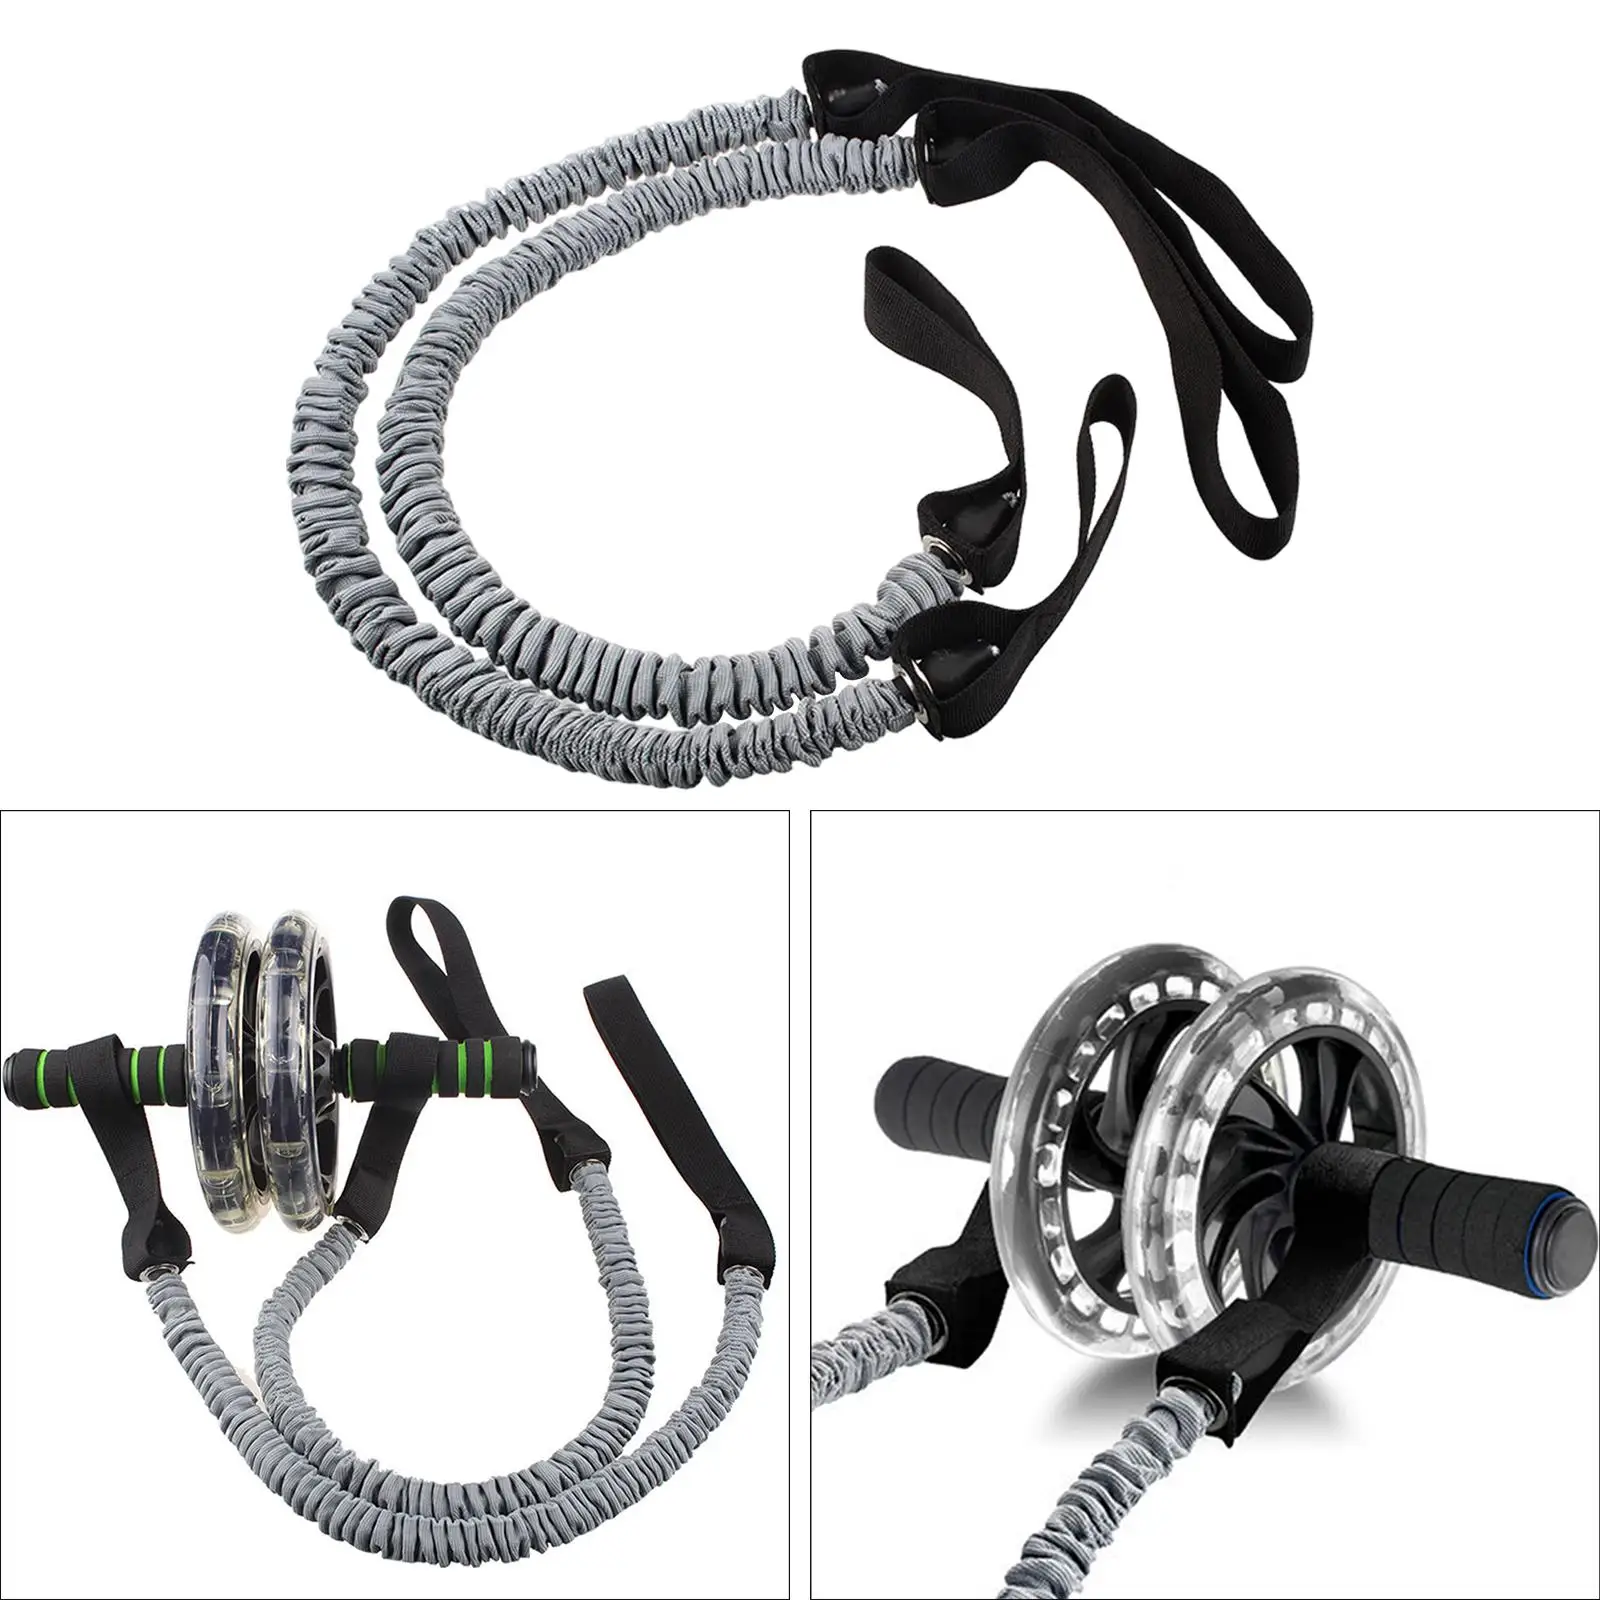 Abdominal Roller Wheel Pull Rope Exercise Wheels Gym Leg Stretch Pull up Band Accessory for Chest Back Shoulders Legs Workout